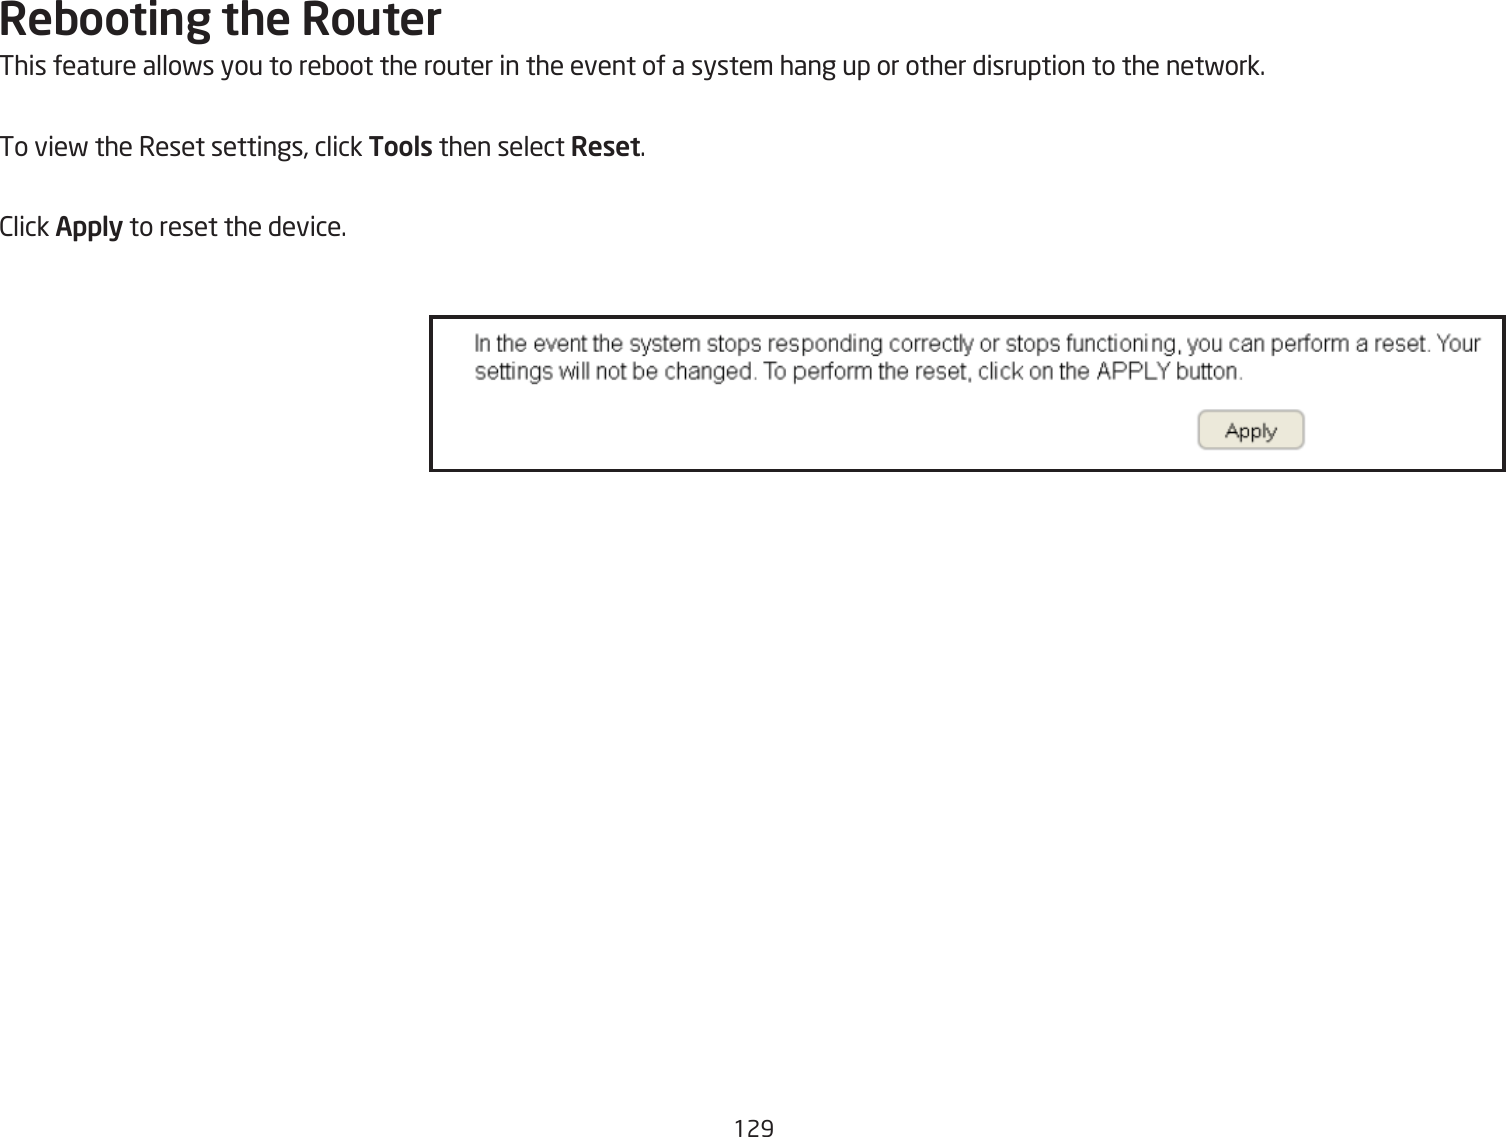 129Rebooting the RouterThis feature allofs you to reQoot the router in the event of a system hang up or other disruption to the netfork.To vief the Reset settings, click Tools then select Reset.2lick Apply to reset the device.